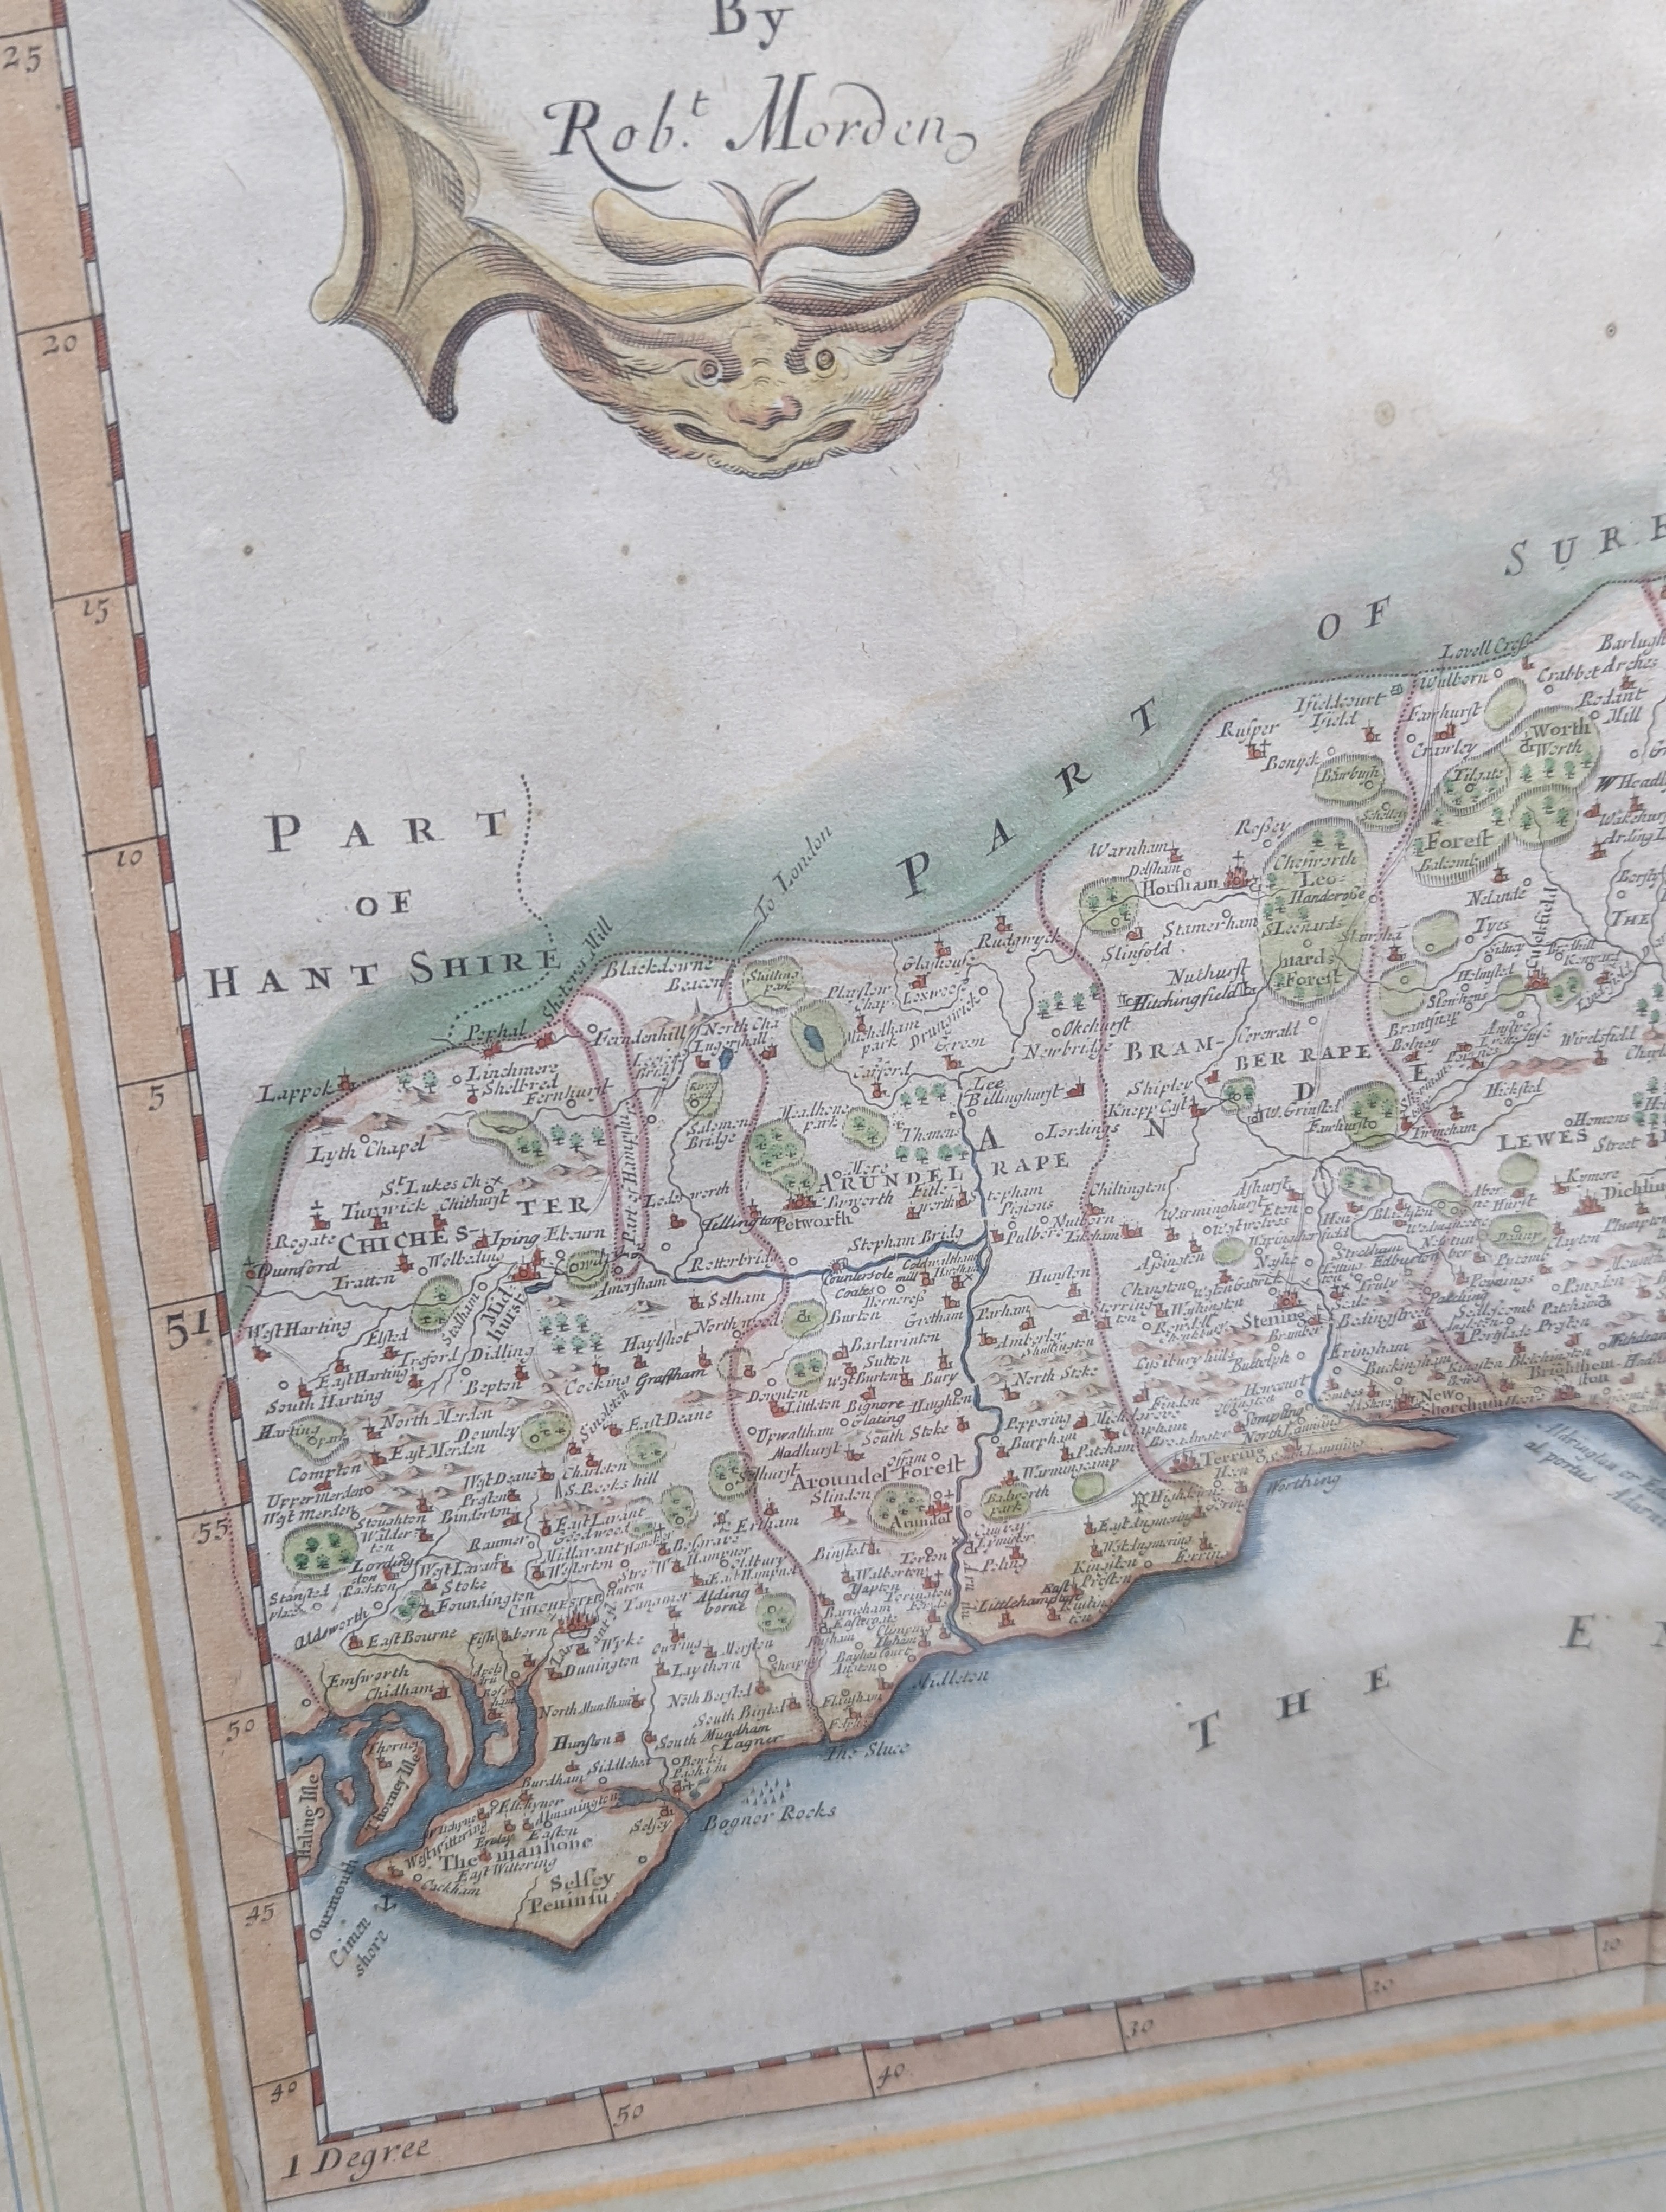 Robert Morden, coloured engraving, Map of Sussex, 35 x 42cm.